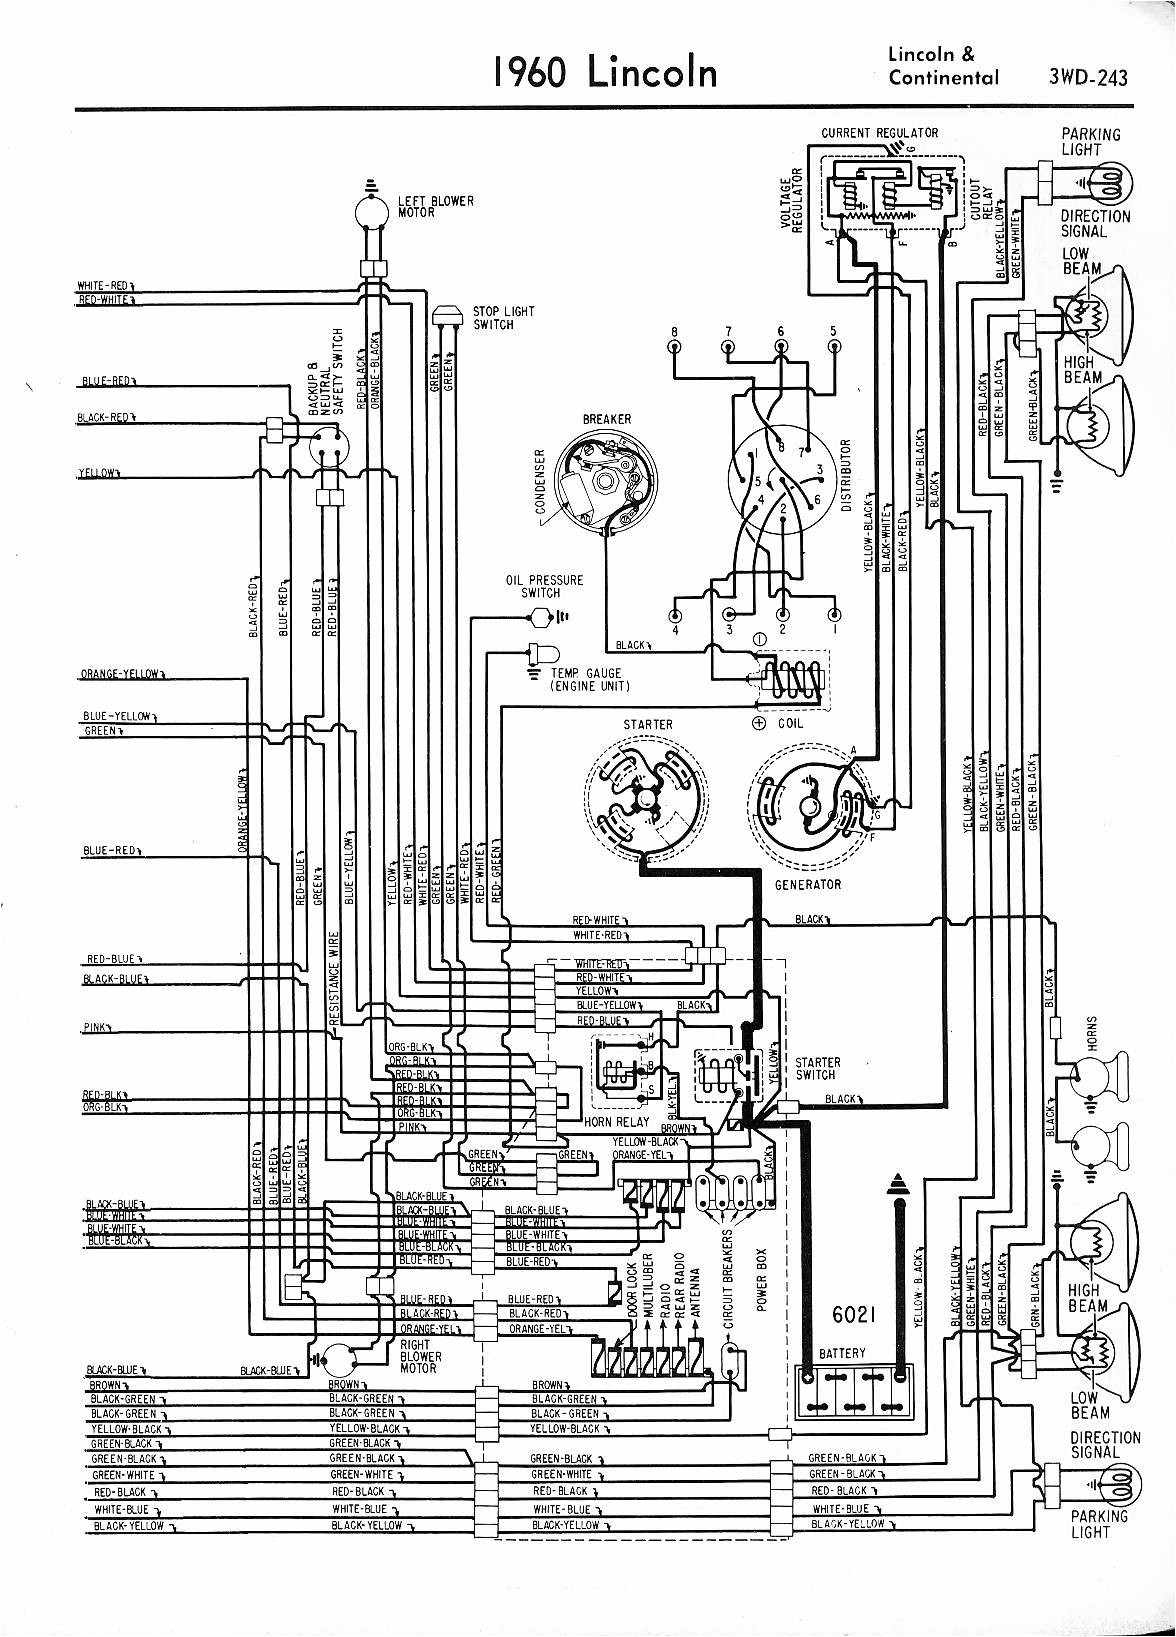 1977 lincoln town car wiring diagram wiring diagrams recent obd2 wiring diagram 1996 lincoln continental